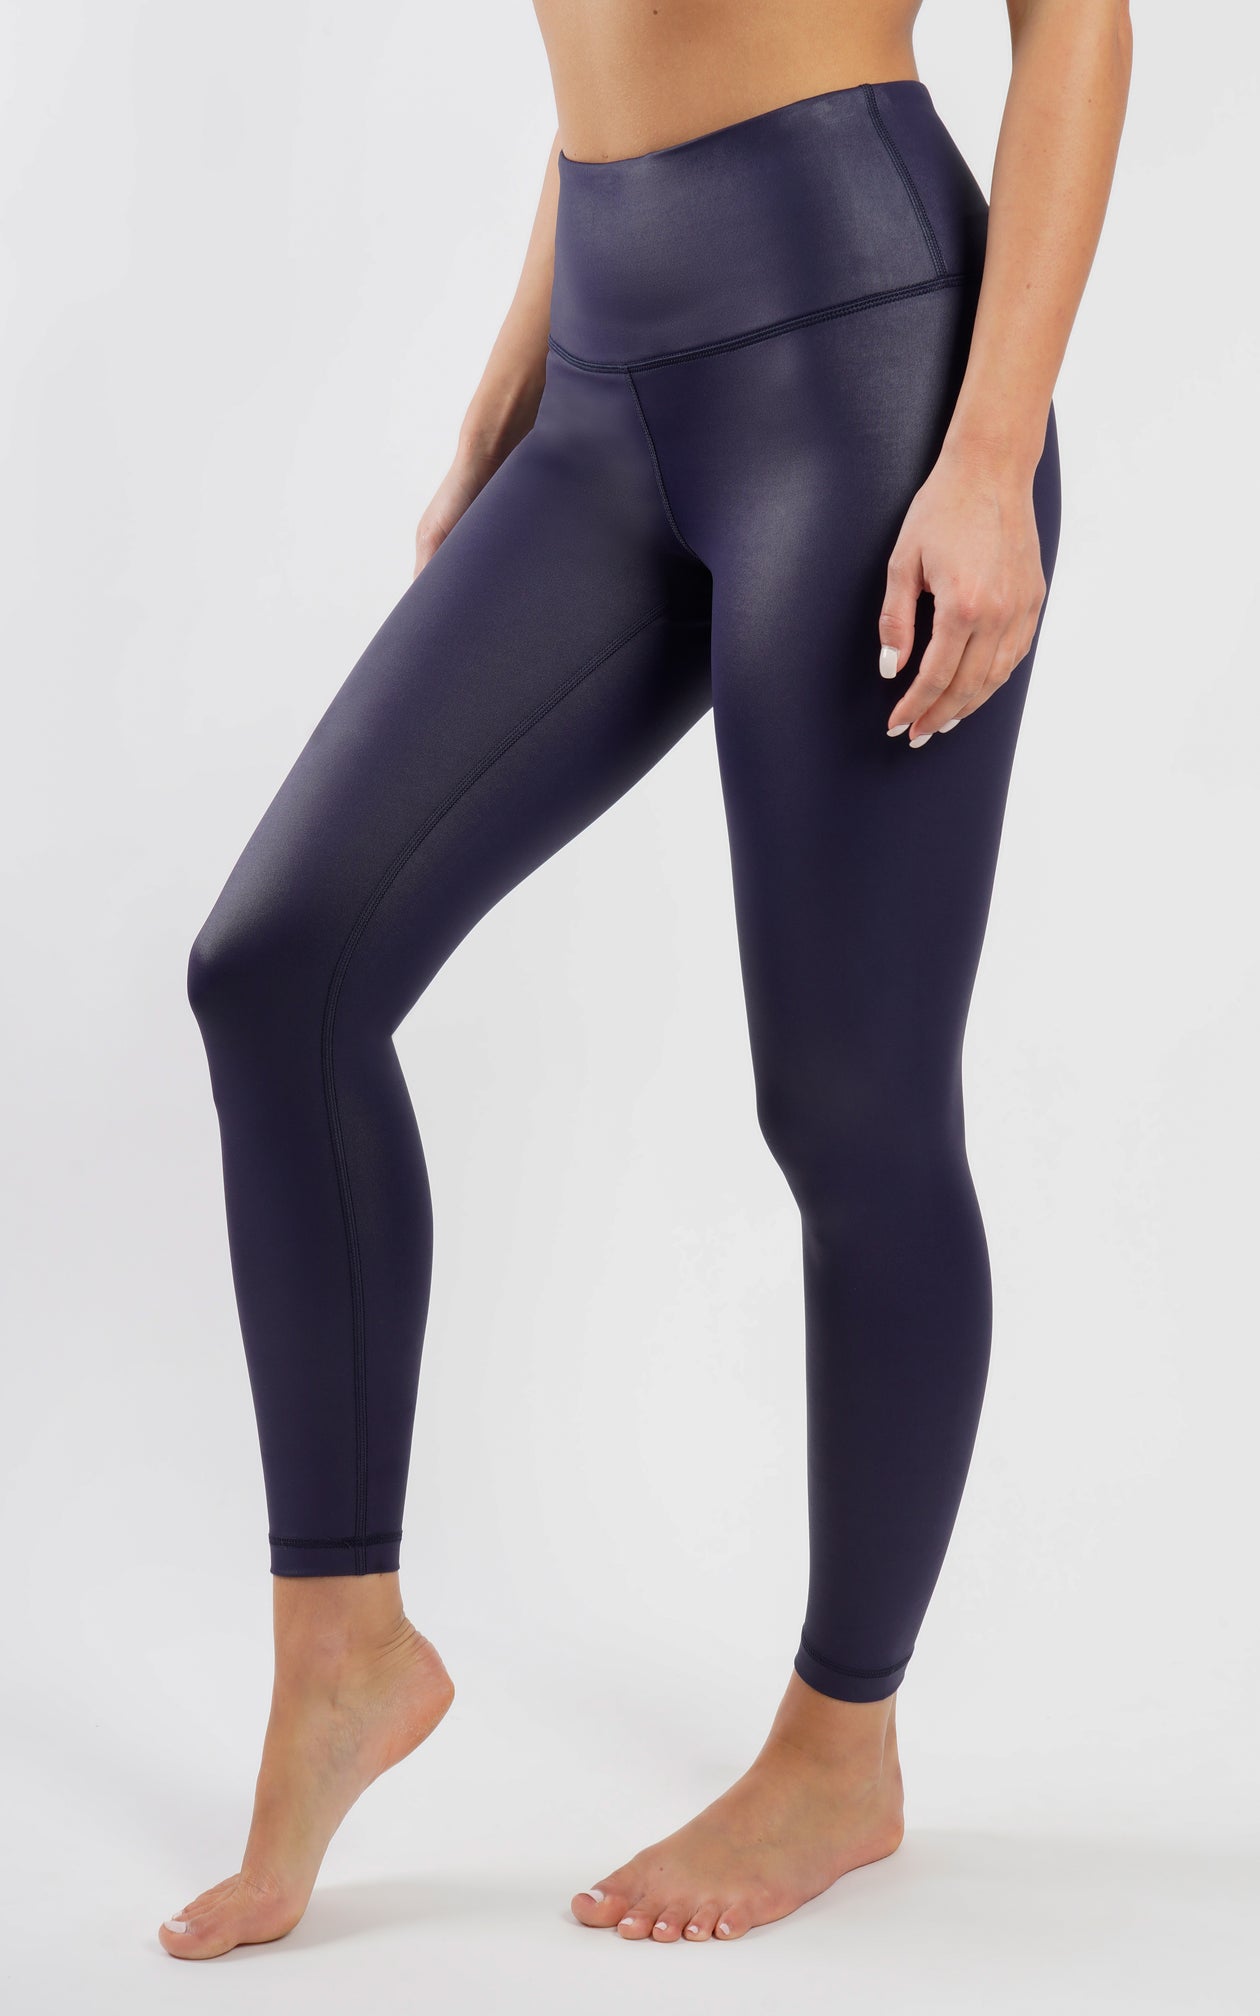 Cool Wholesale super shiny leggings In Any Size And Style 